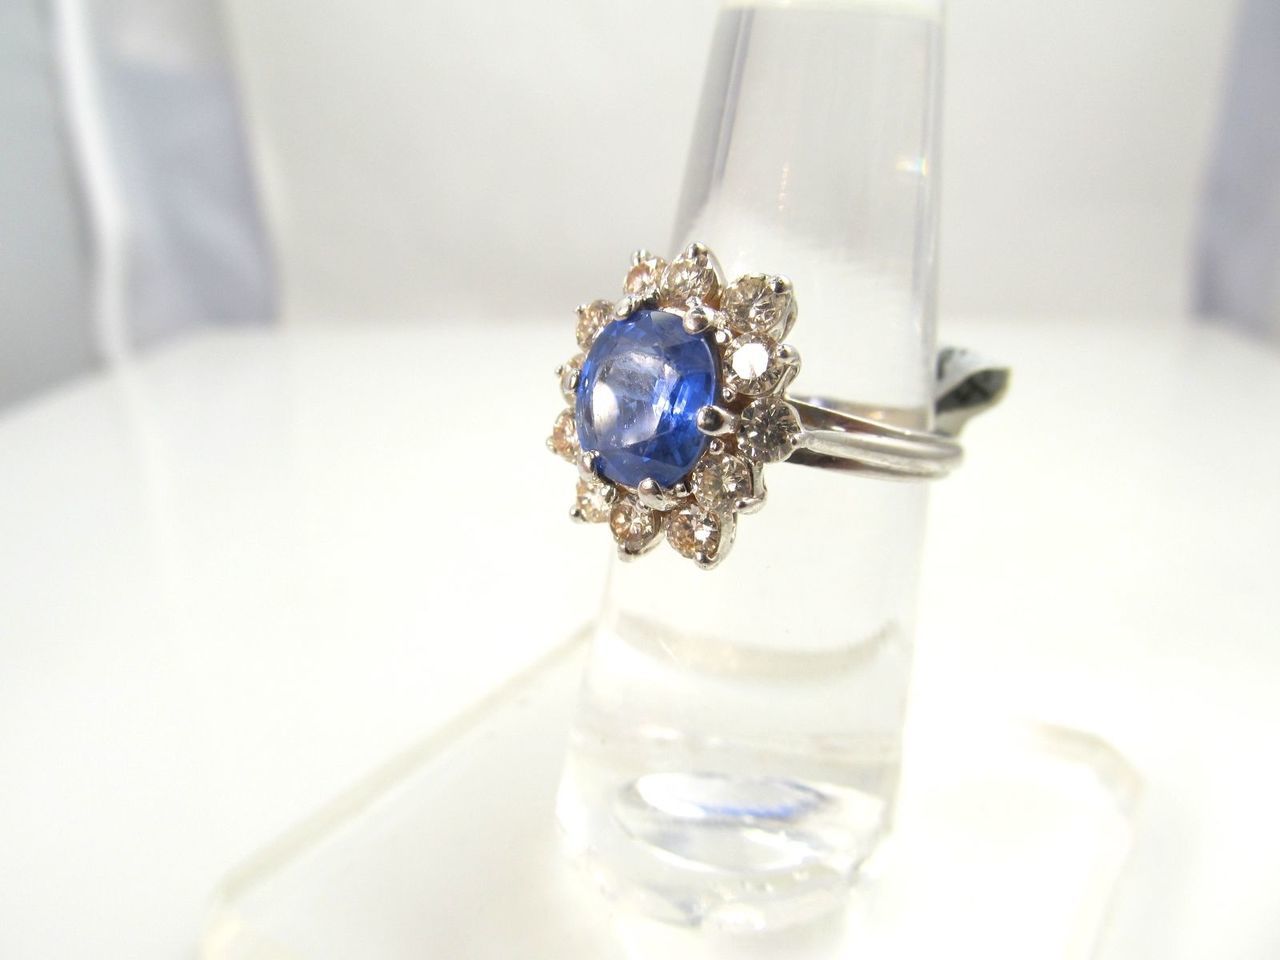 14k white gold ring with a 2ct sapphire and 1.25ct diamond ring.  Diamonds are VS2-SI1, G-H